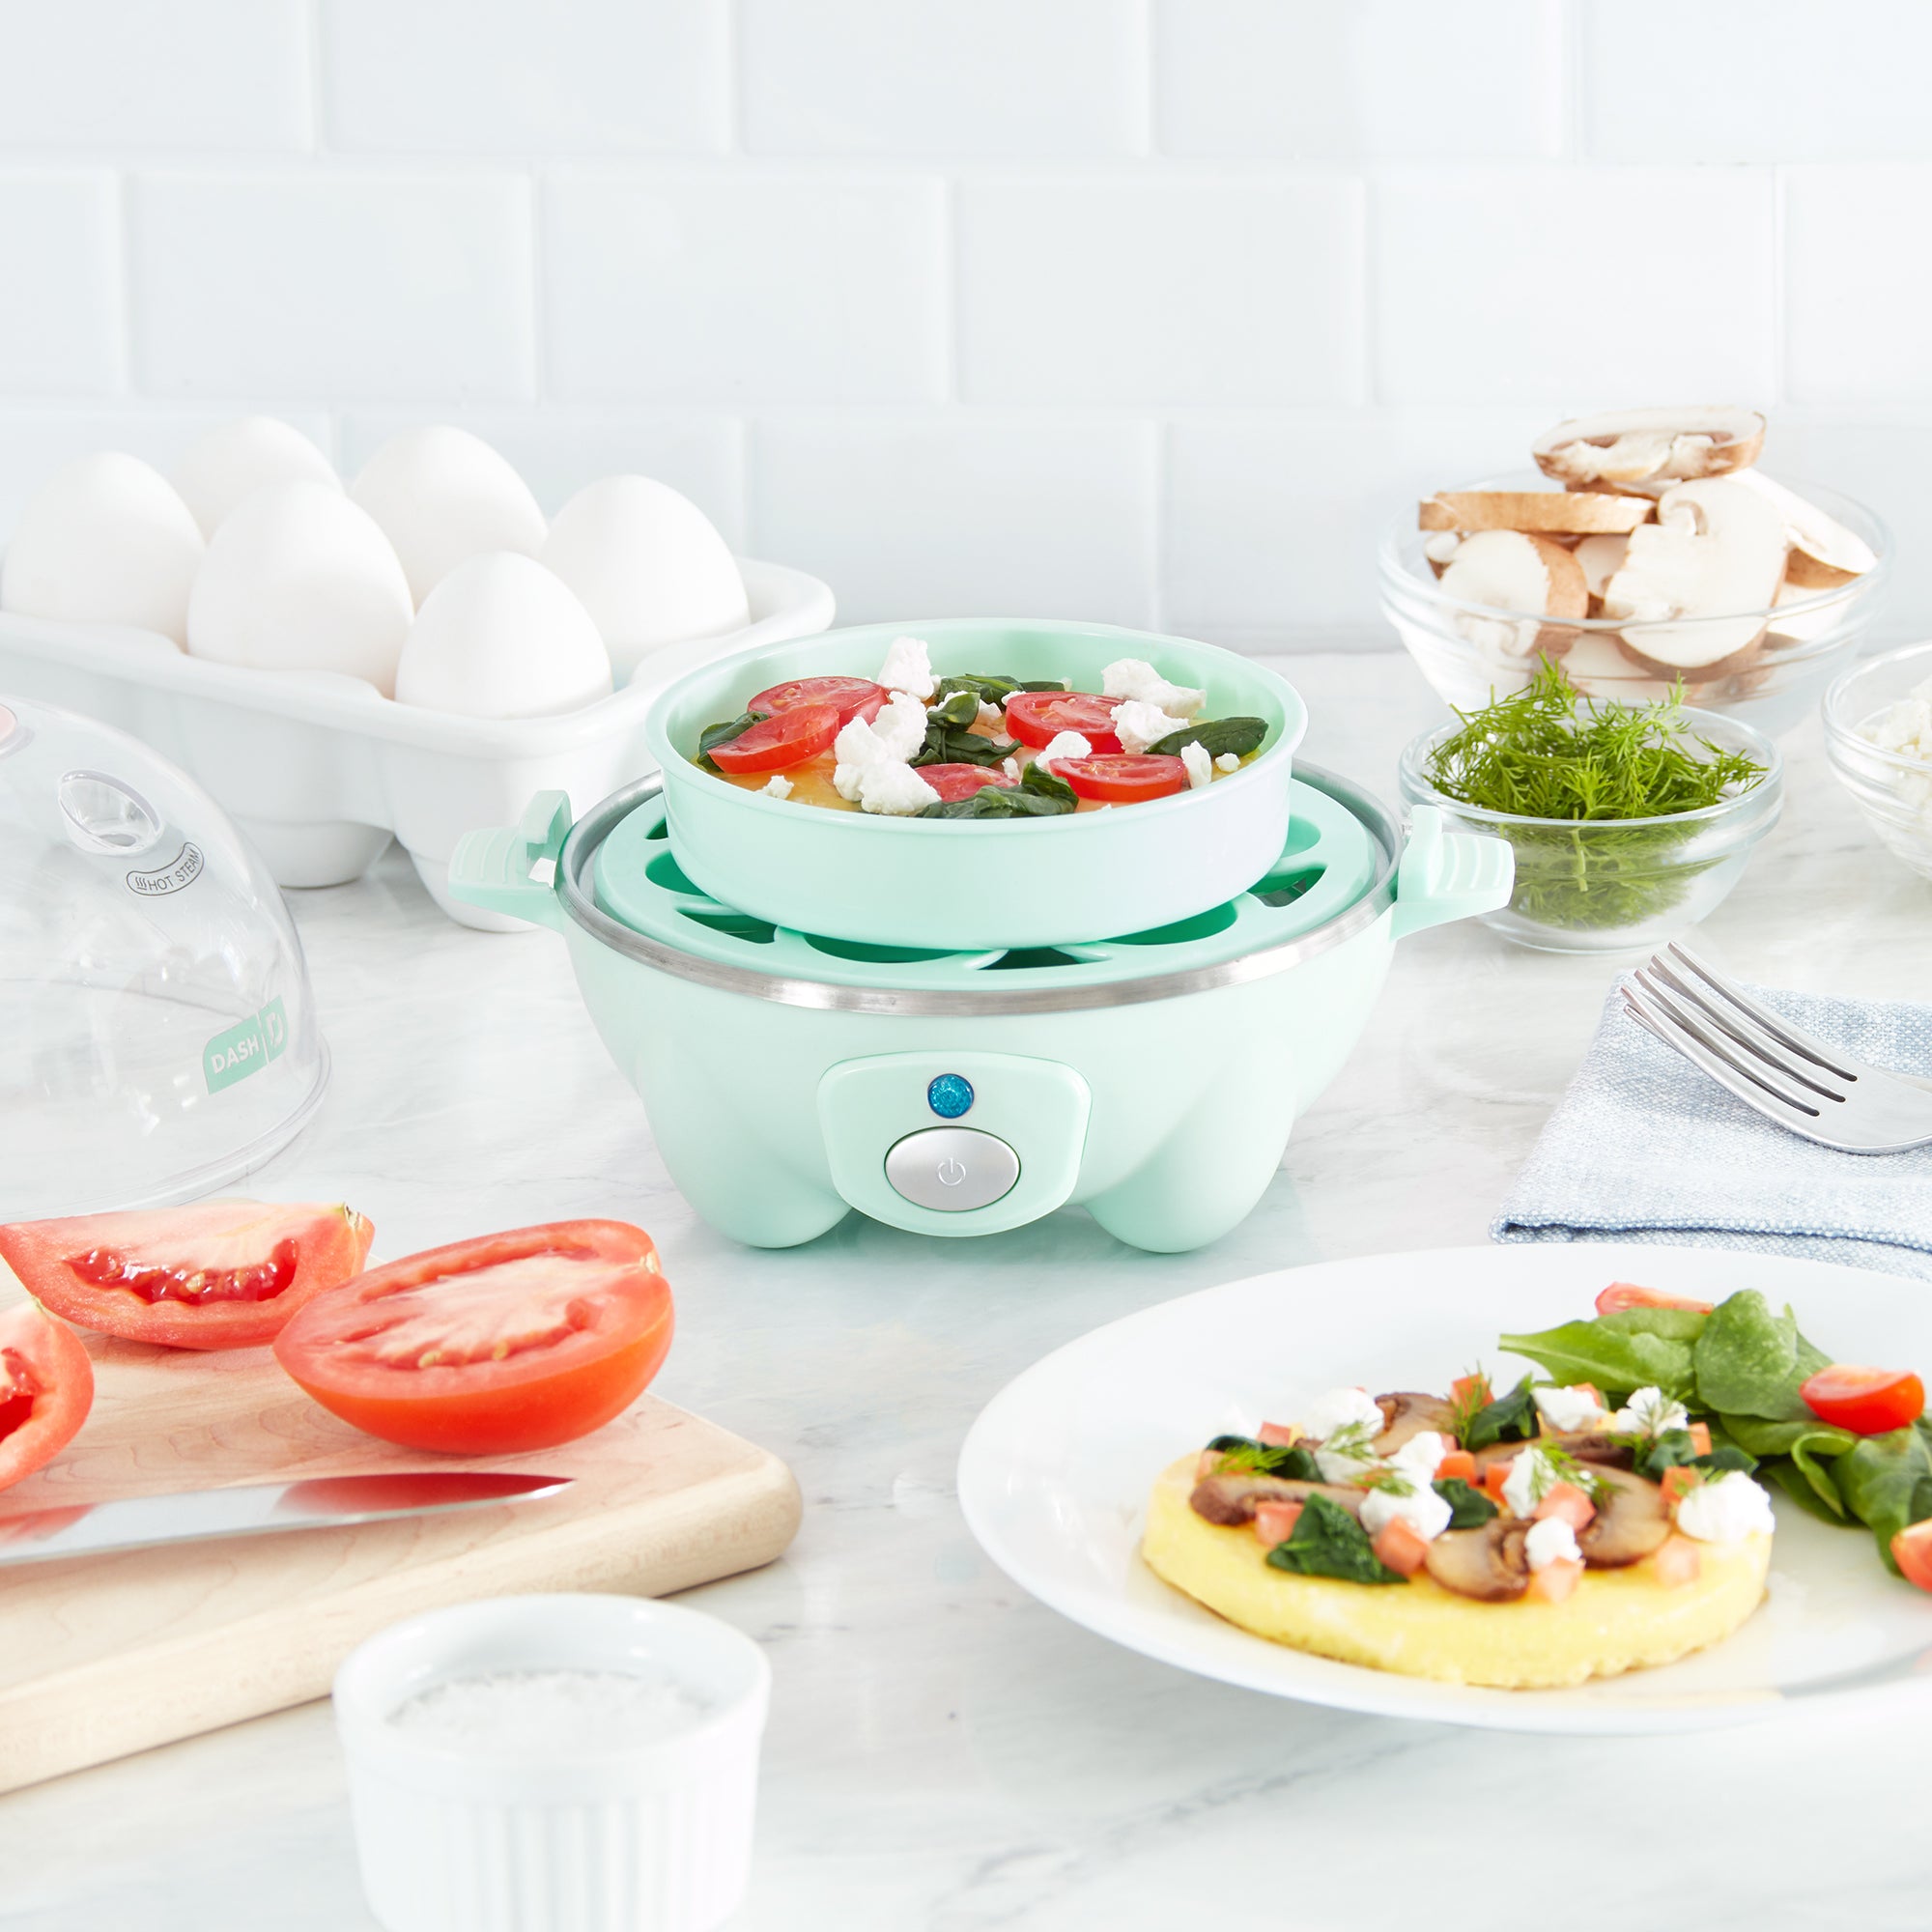 Dash Rapid Egg Cooker: 6 Egg Capacity Electric Egg Cooker for Hard Boiled Eggs Poached Eggs Scrambled Eggs or Omelets with Auto Shut Off Feature - Red